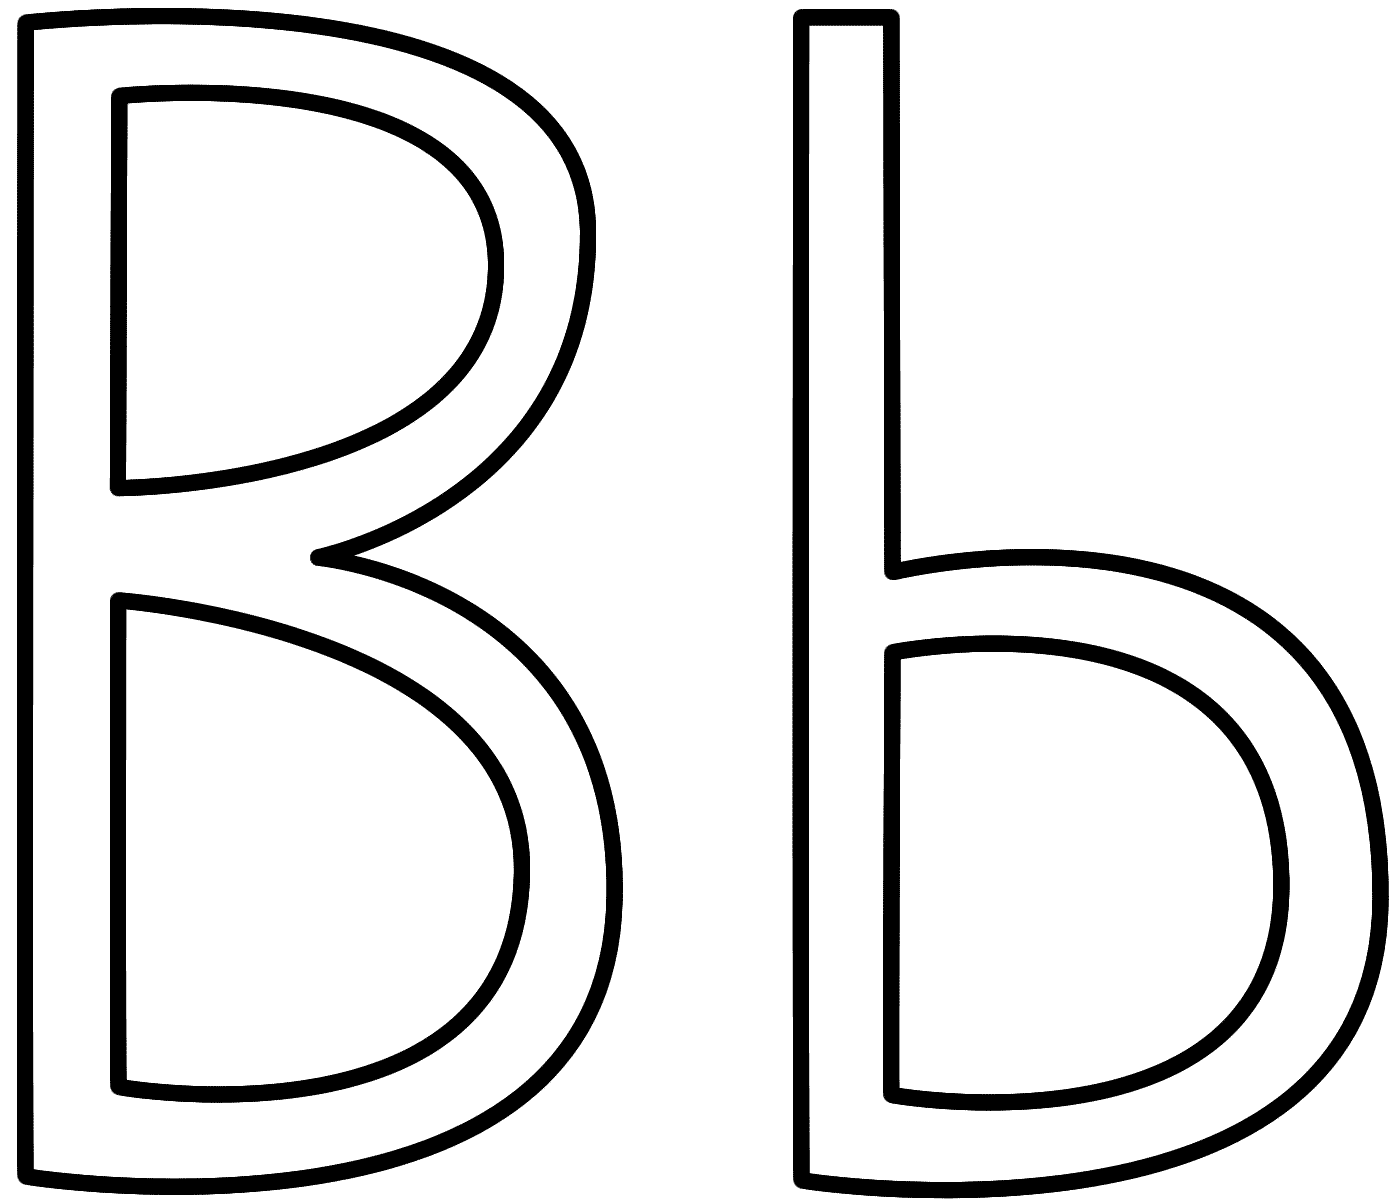 letter-b-pictures-big and small